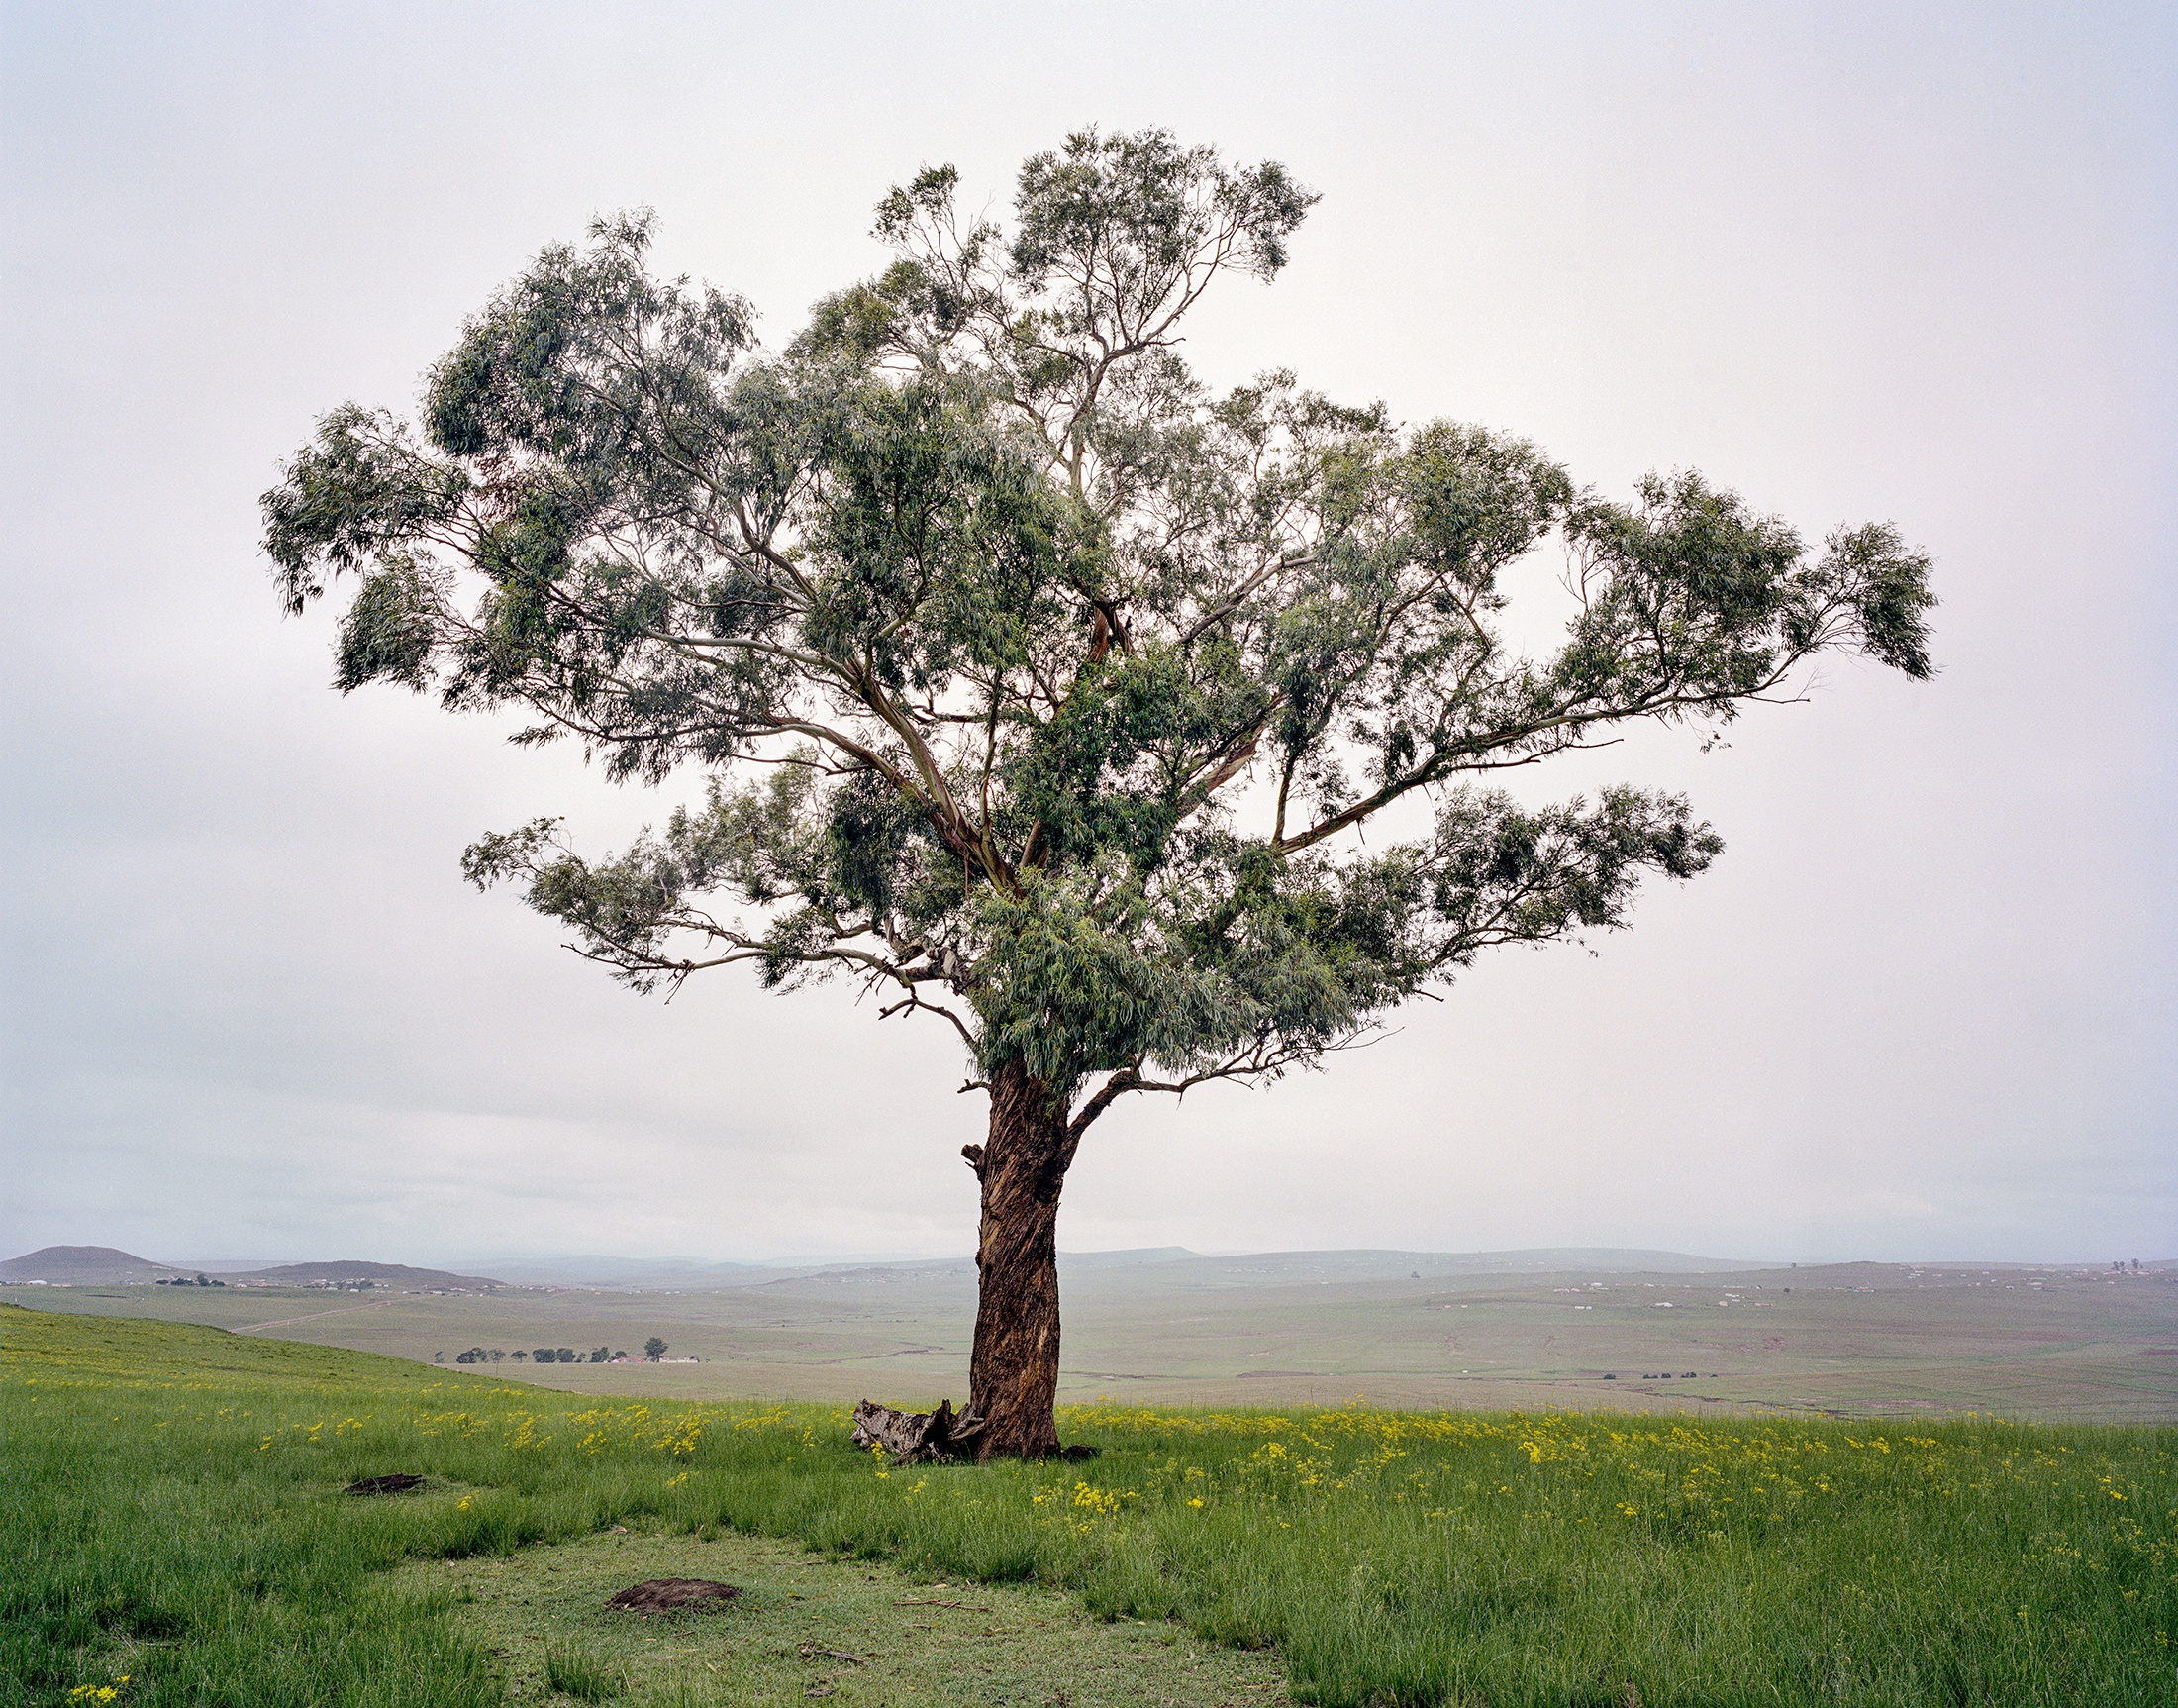 Lindokuhle Sobekwa's photograph 'Mthi woLanga' shows a tree in a grassy plain.
